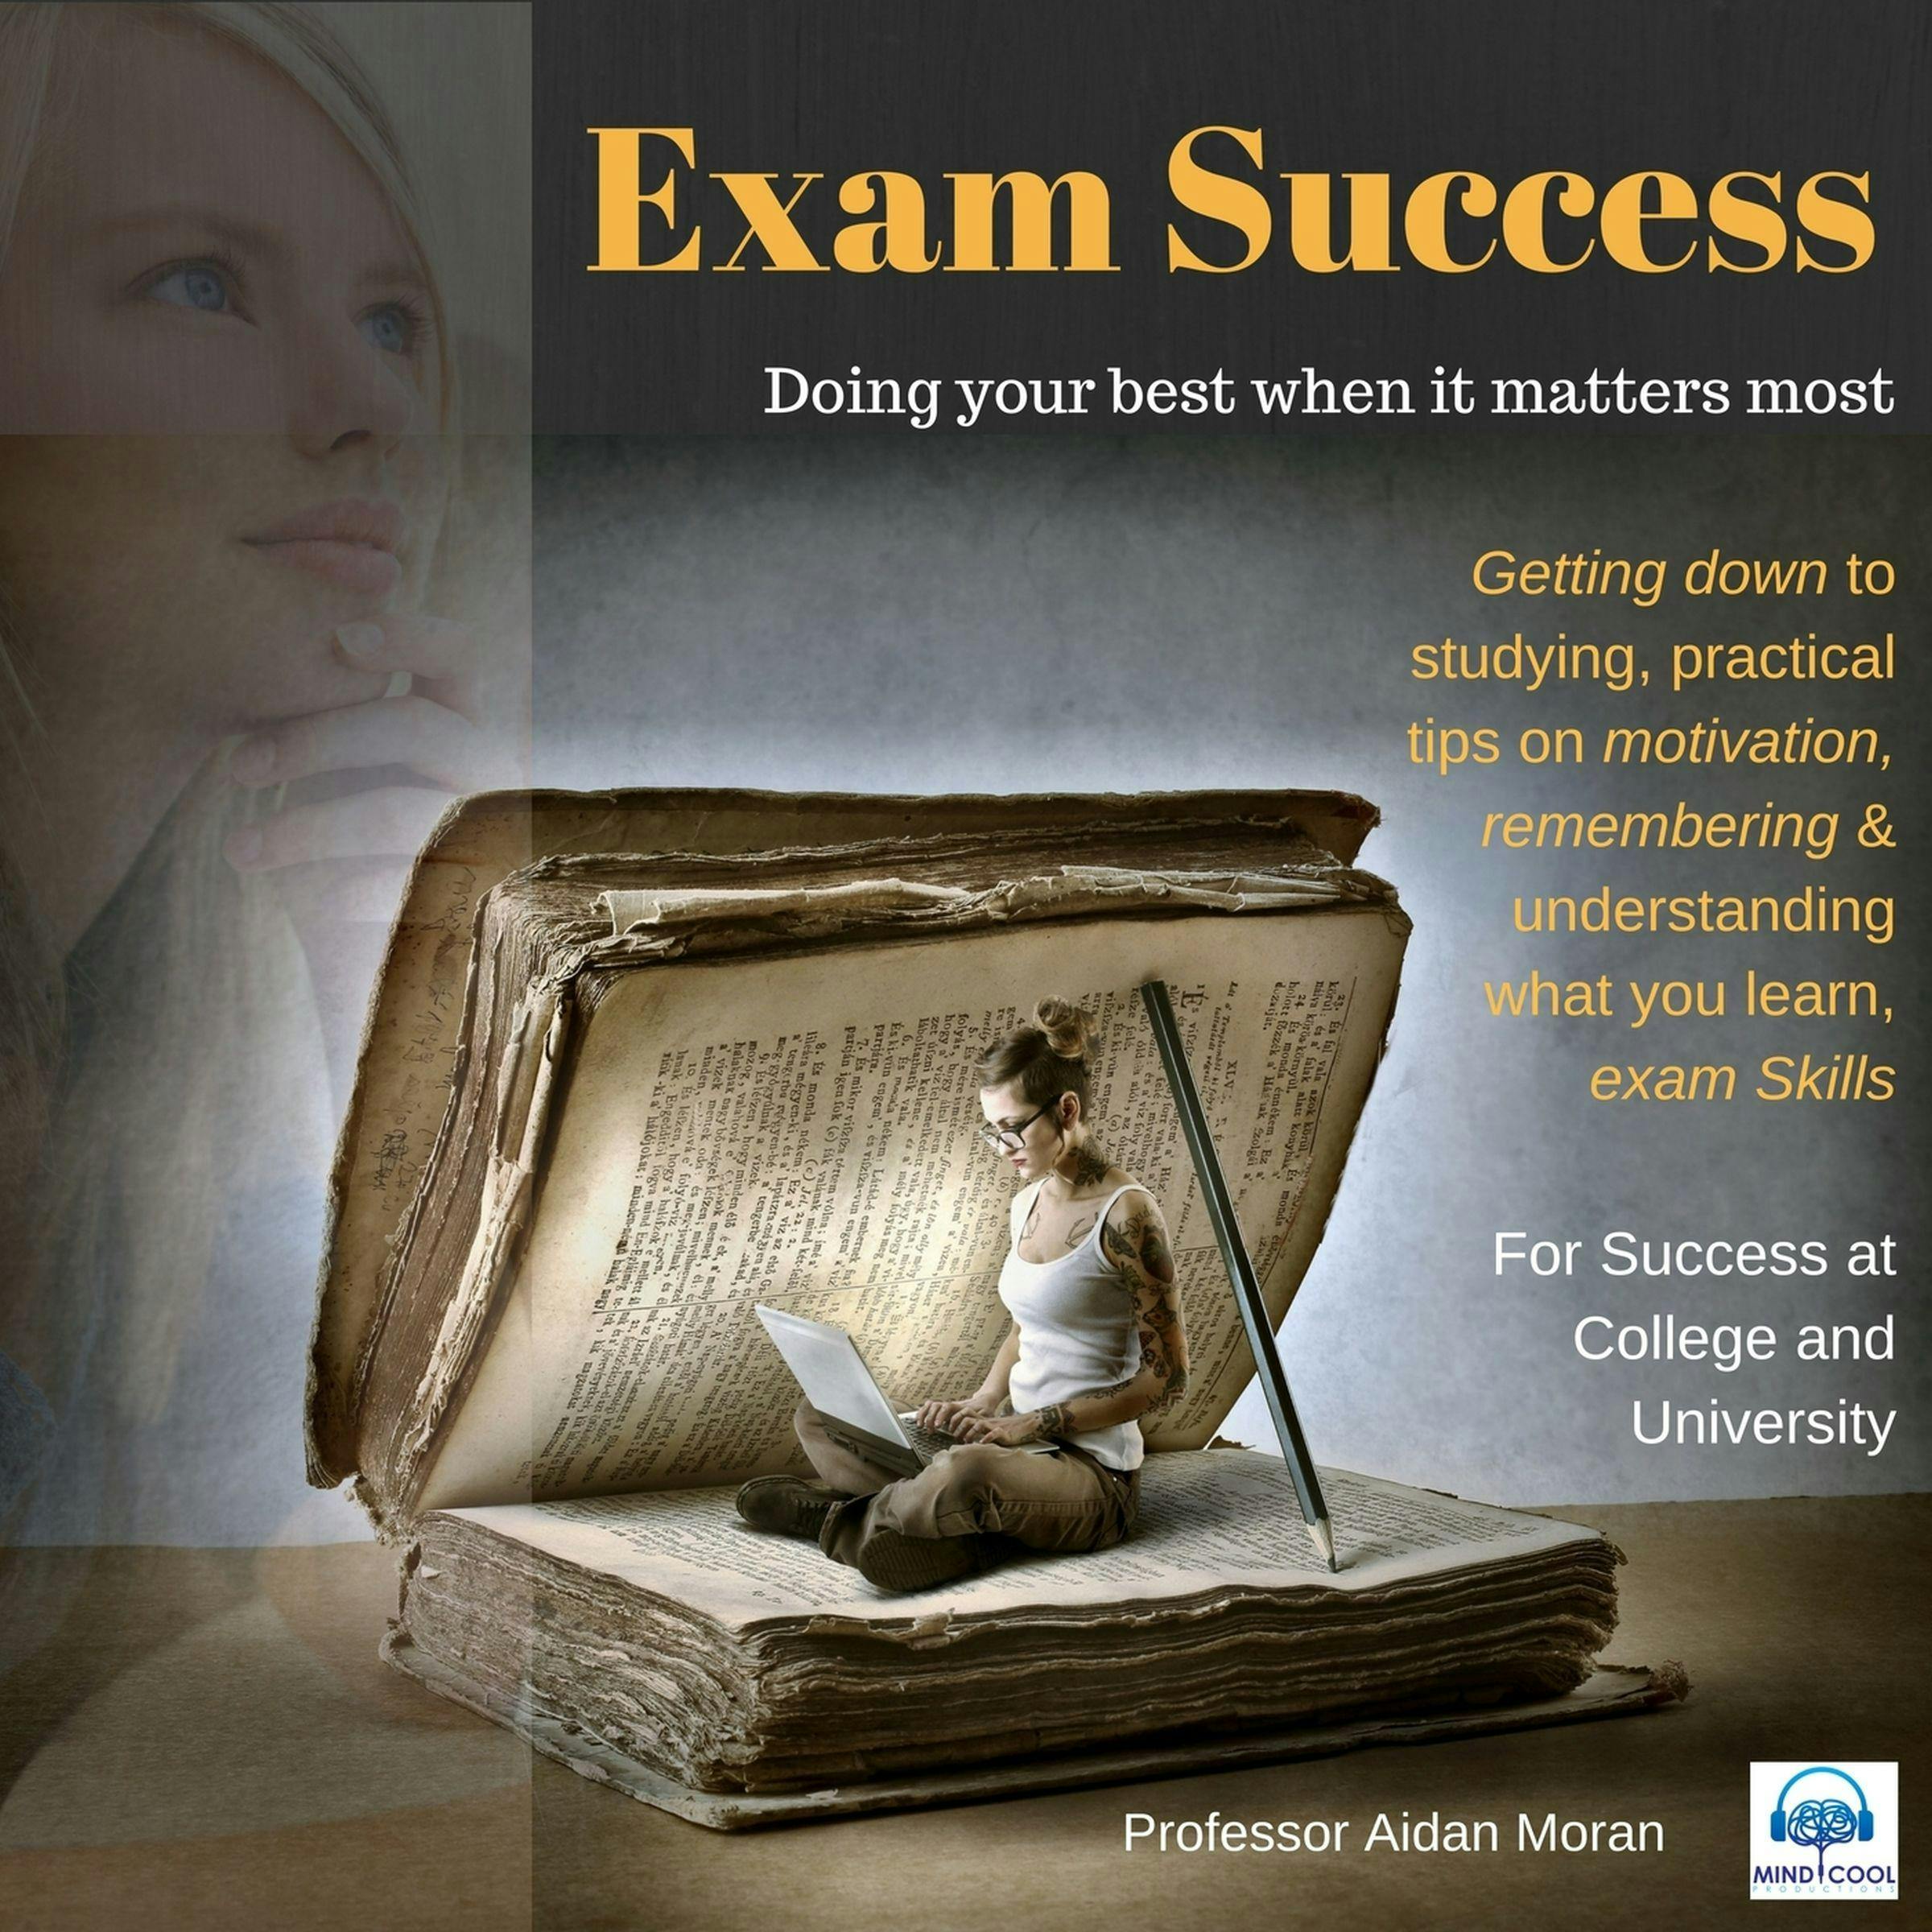 Exam Success: Getting down to studying, practical tips on motivation, remembering & understanding what you learn, exam skills - Aidan Moran